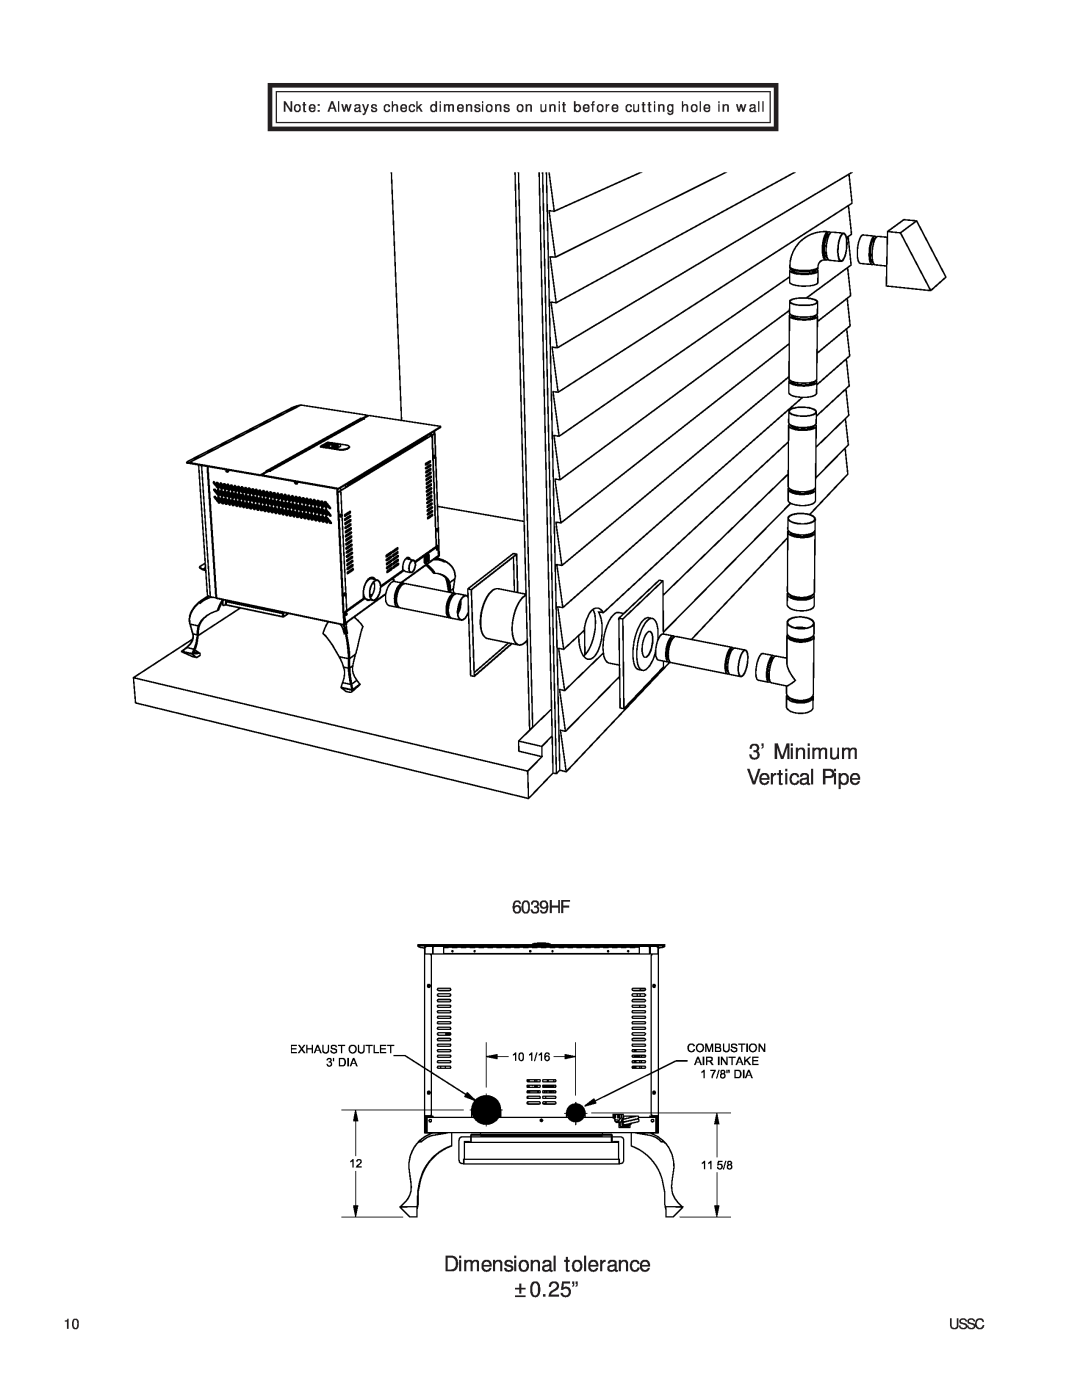 United States Stove 6039HF owner manual 10 1/16, 1 7/8 DIA, 11 5/8, Exhaust Outlet, Combustion, 3 DIA, Air Intake 